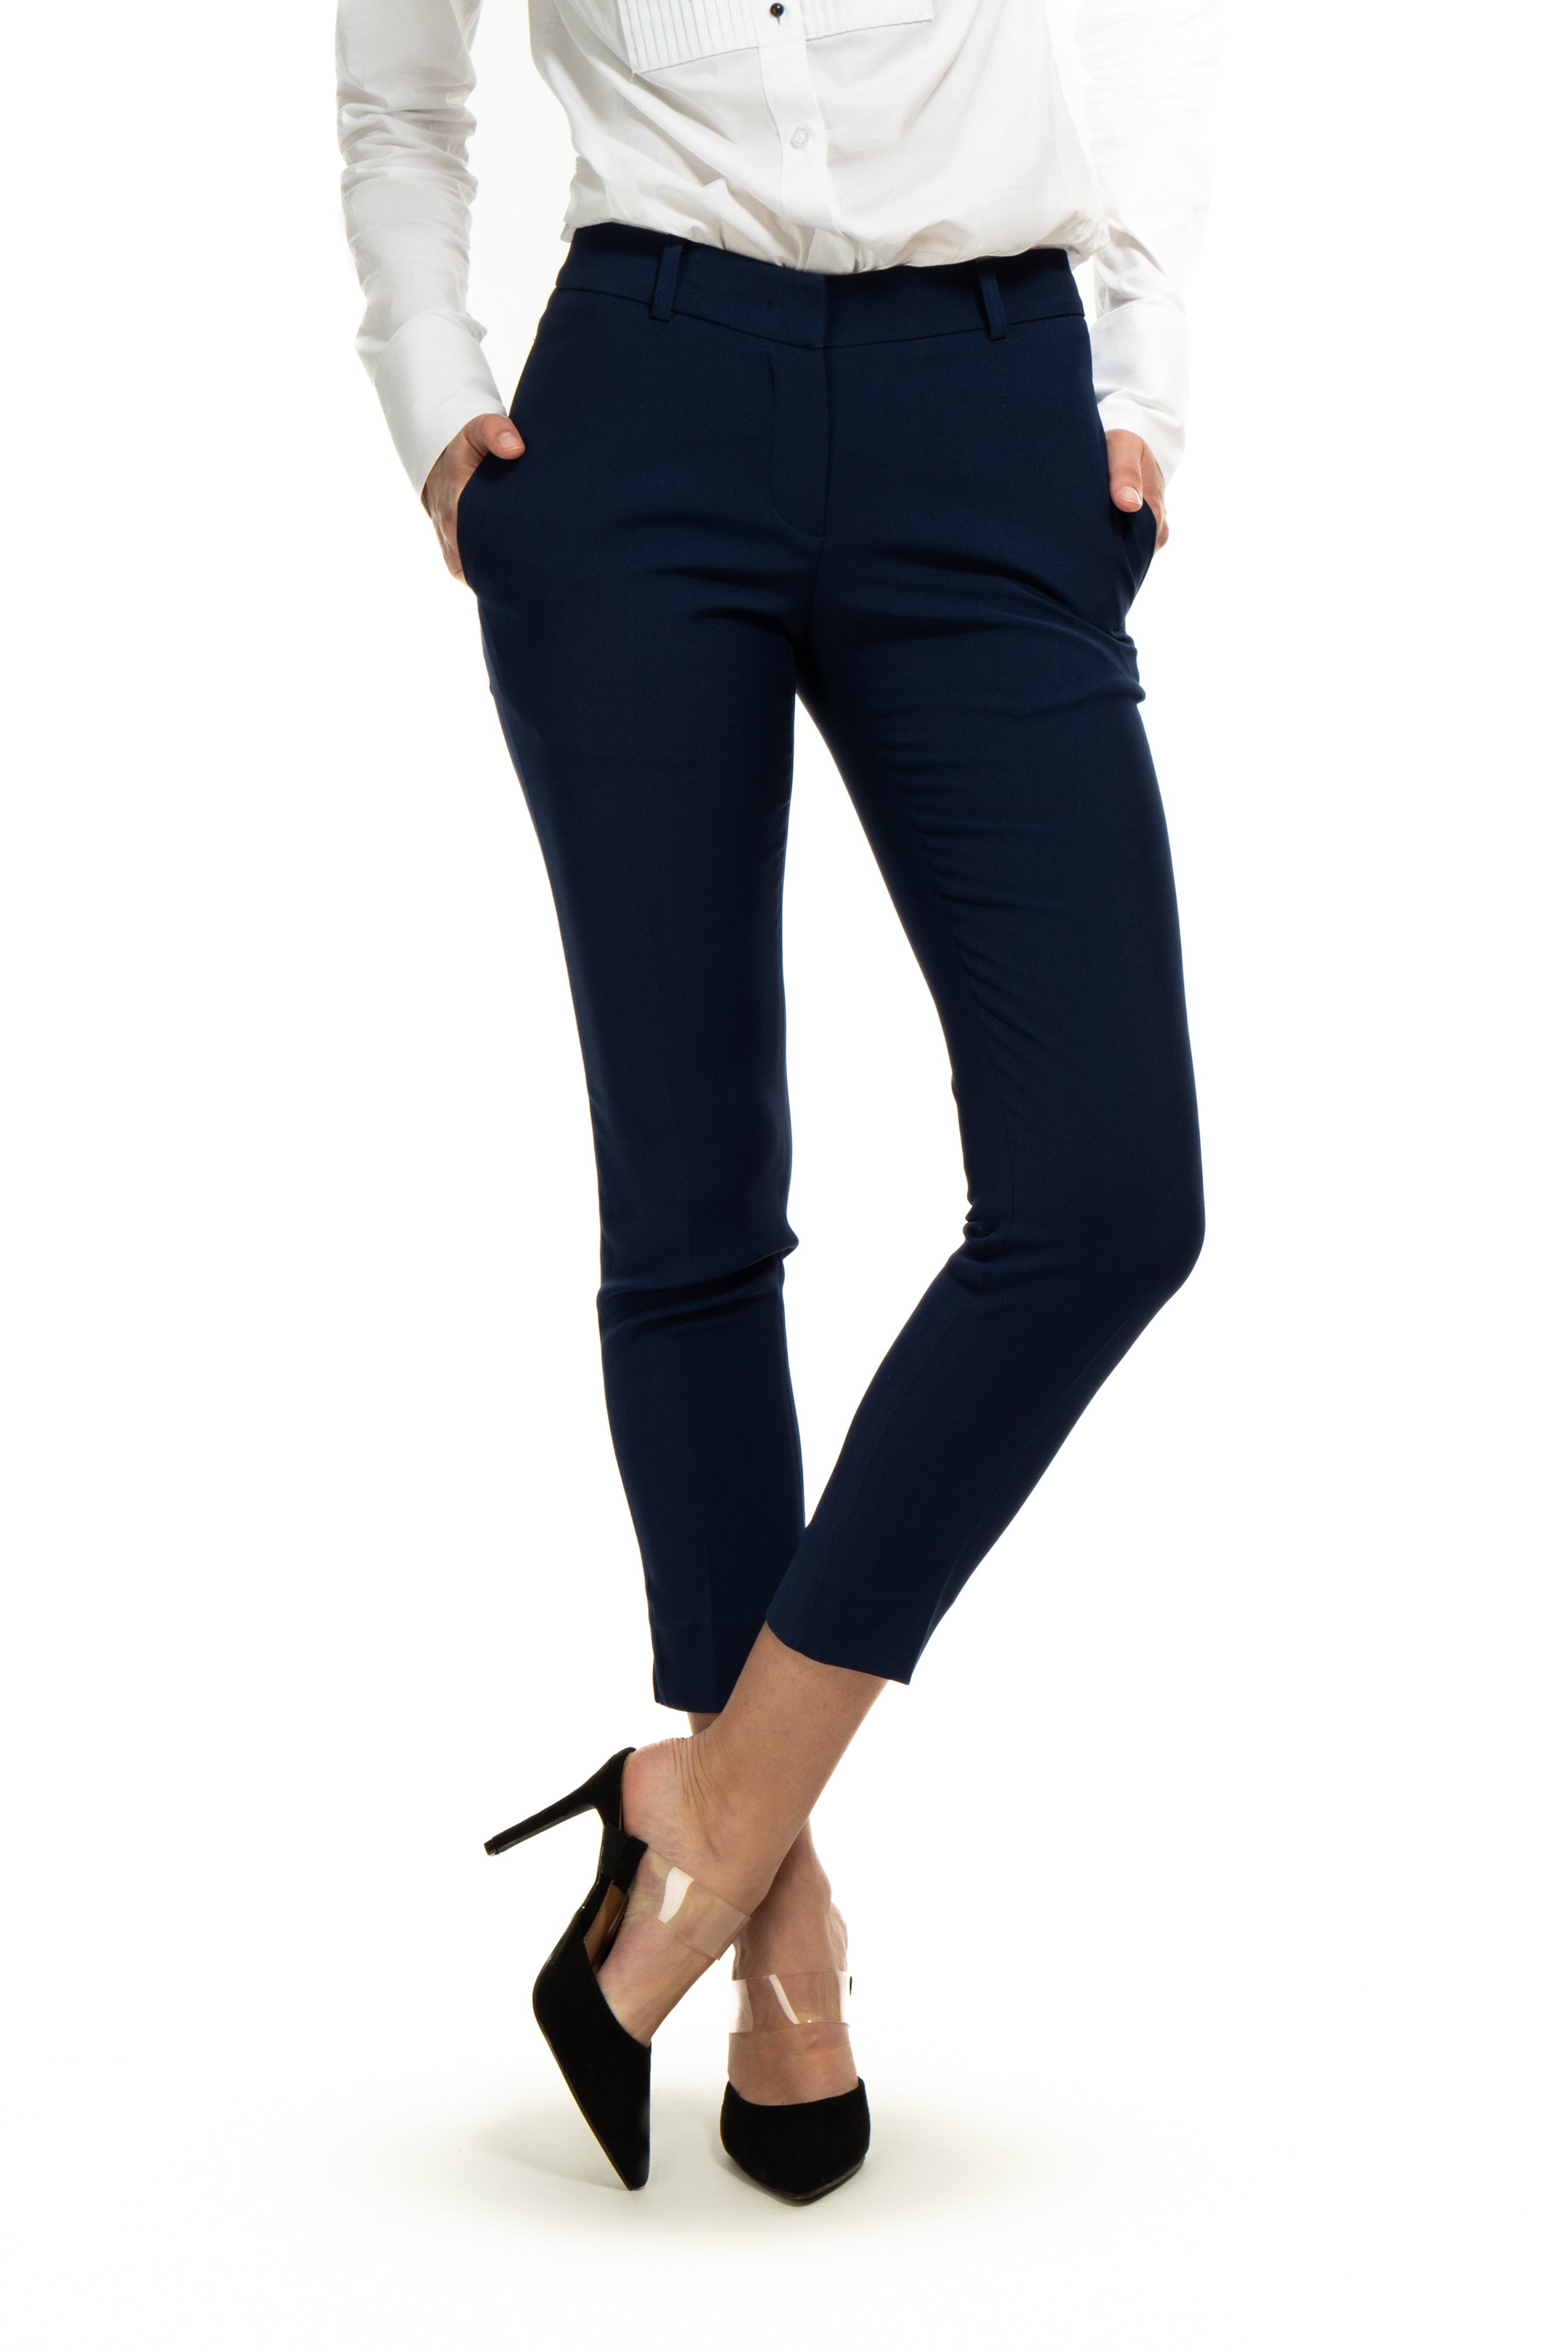 Buy RAWWARRY The Women High-Rise Skinny Fit Formal Pant | Slim Fit Trouser  | Official Trouser |Super Soft Fabric | Fully Stretchable | Ultra Soft  Fabric Navy at Amazon.in